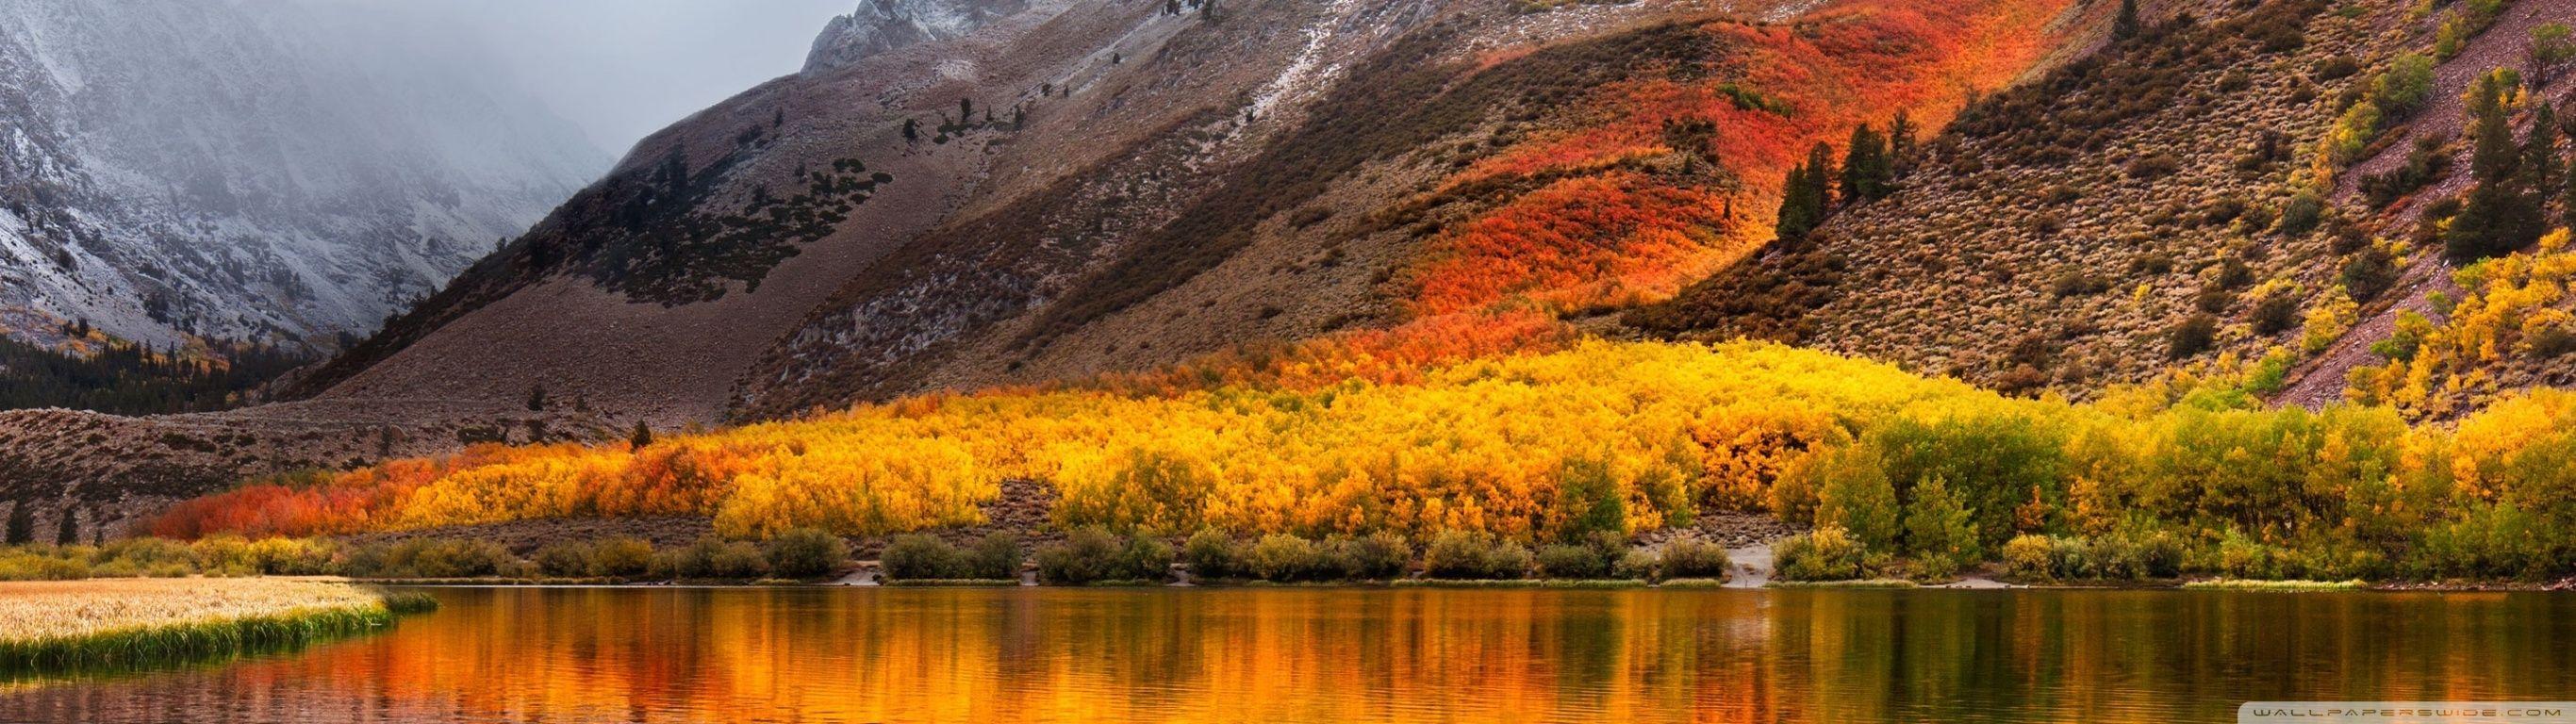 mac os sierra wallpapers for iphone